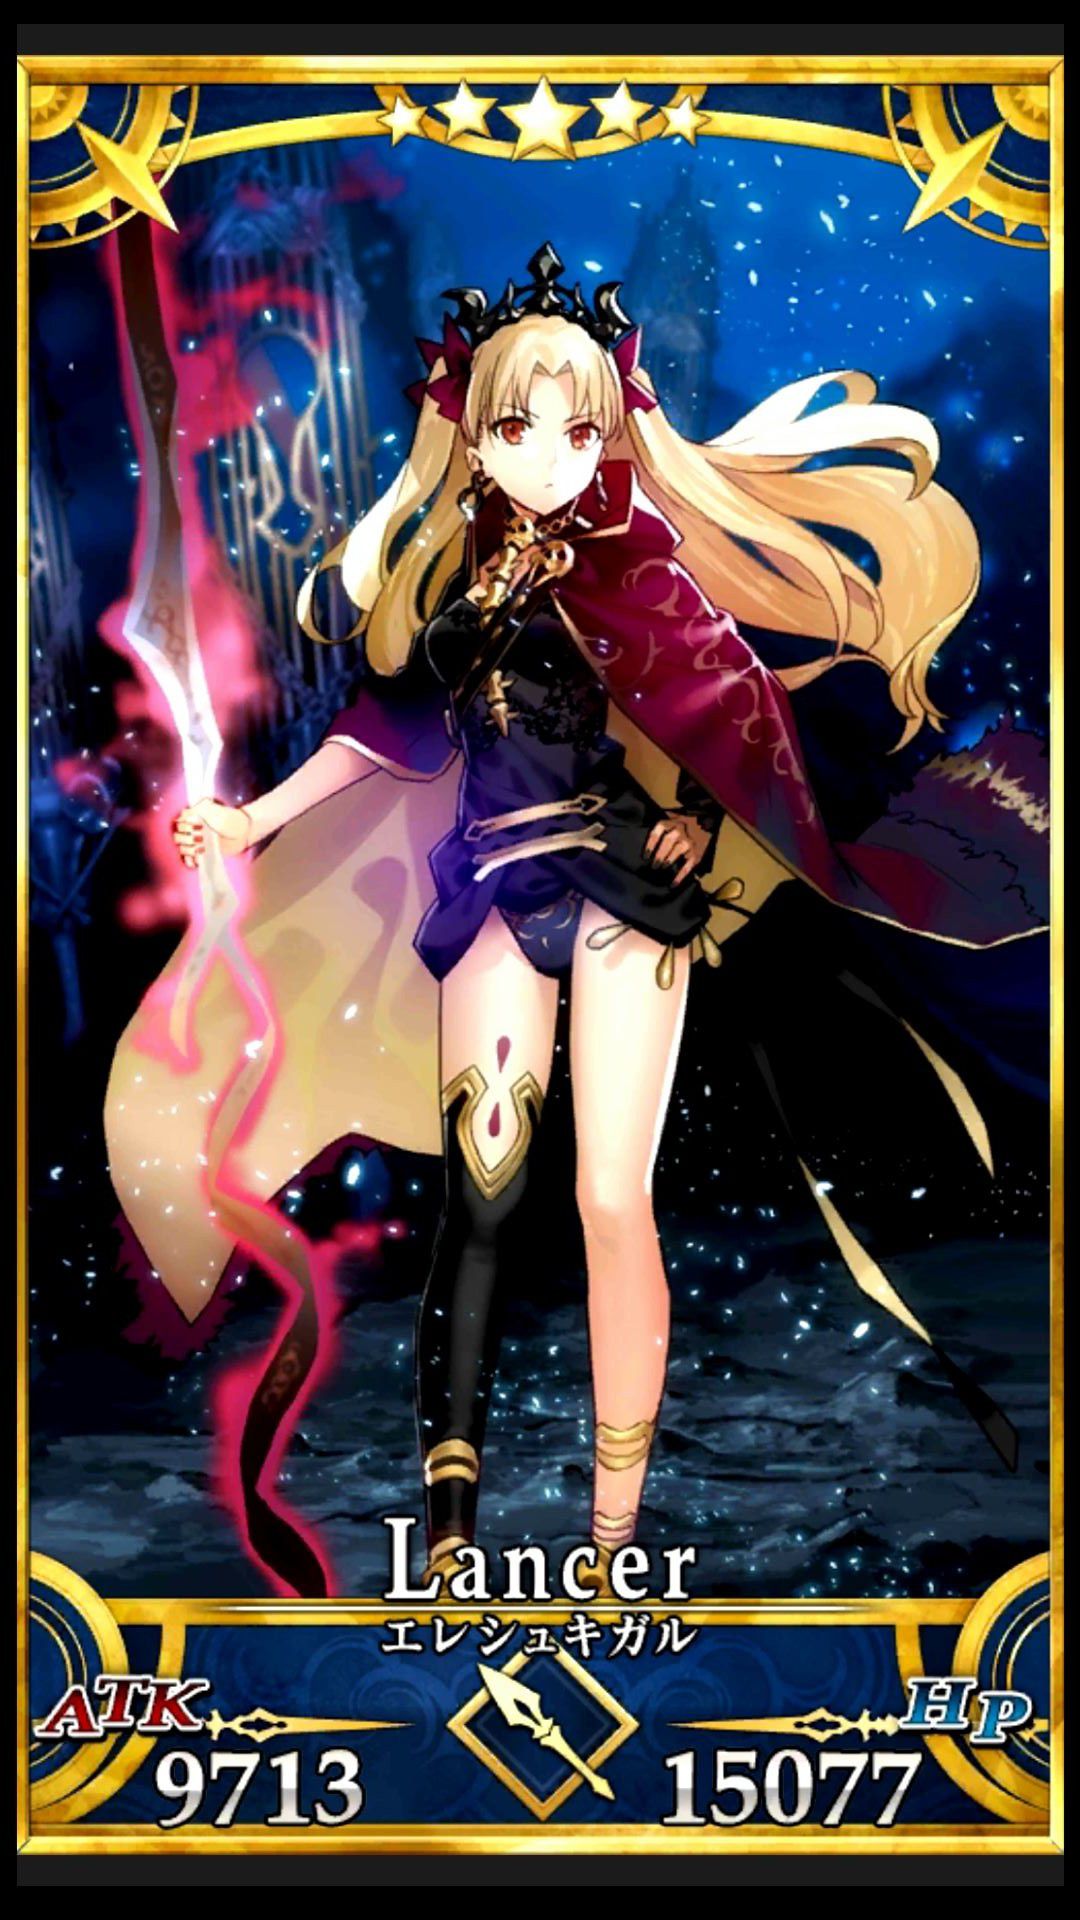 [Fate/Grand order] The final second coming illustrations cute Ereshkigal transcendence! 2